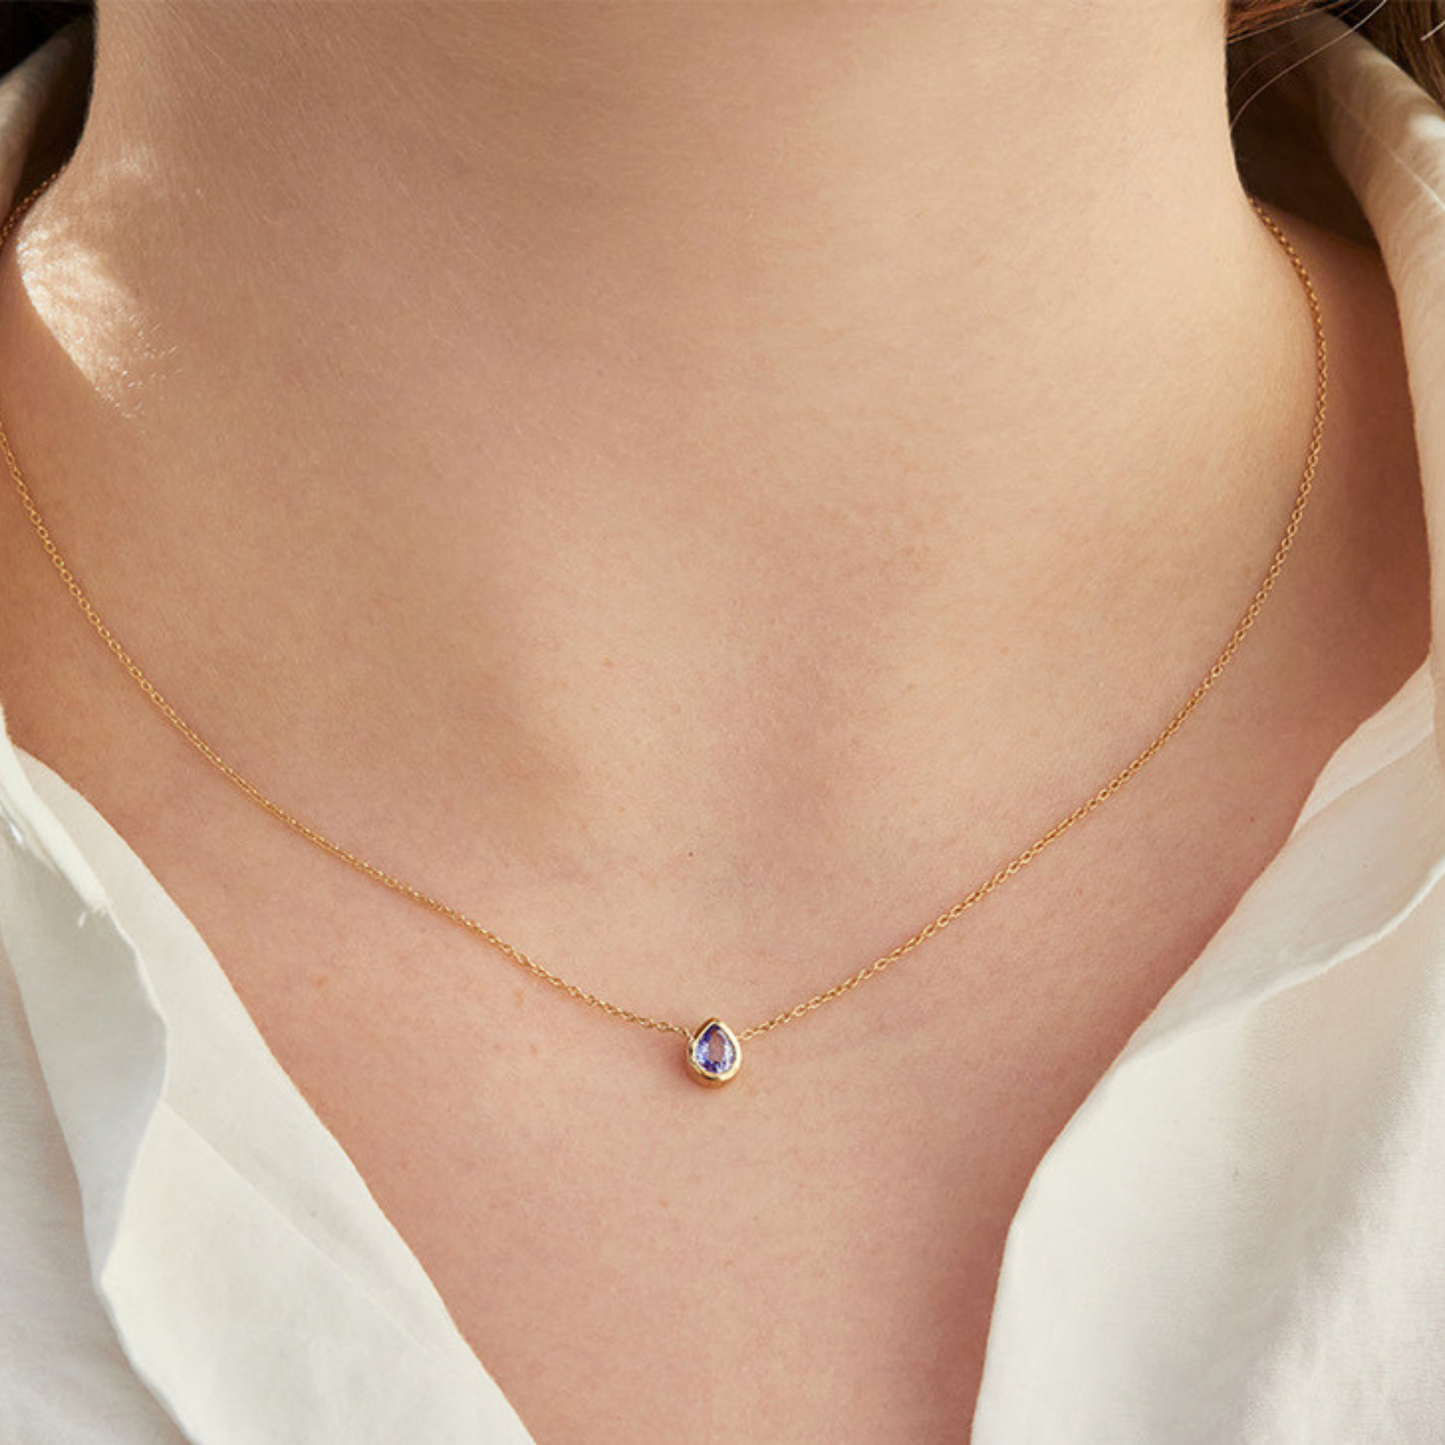 Minimalist Colorful Gold Zircon Necklaces for Women